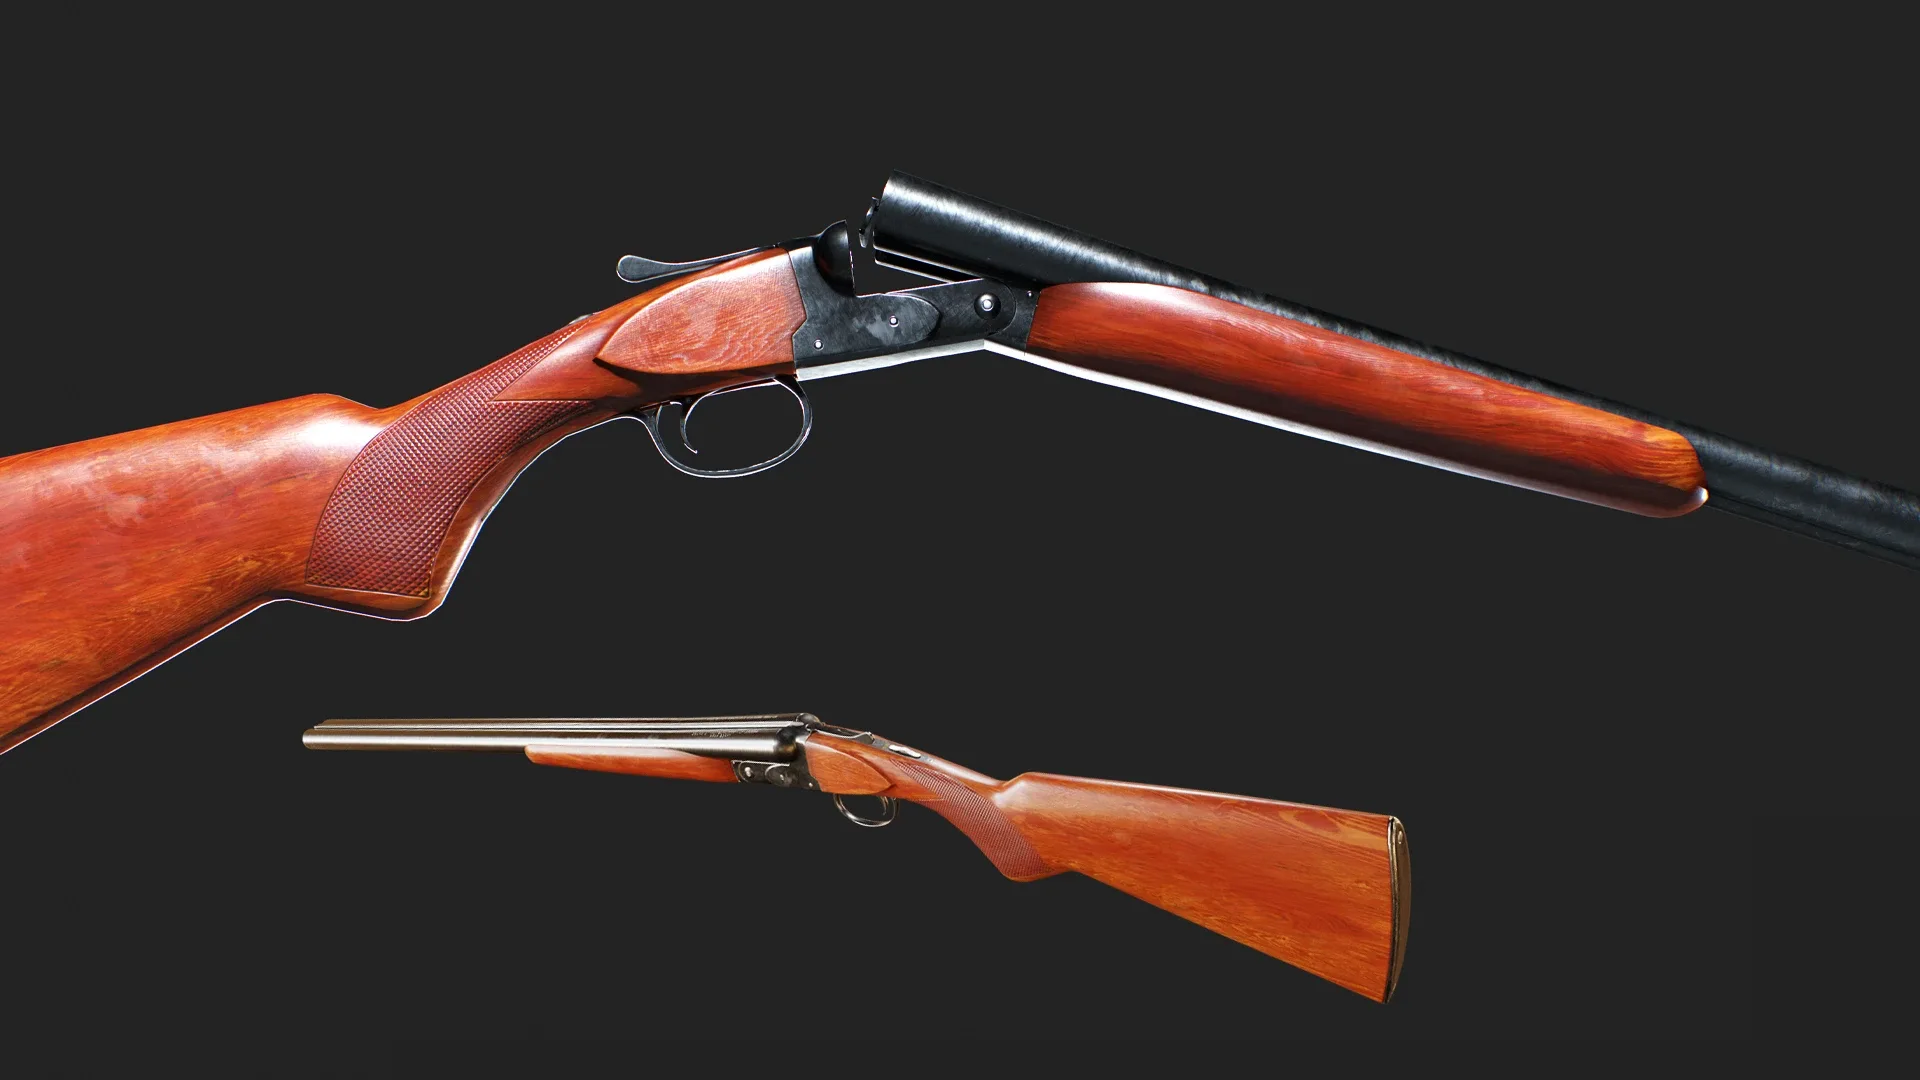 Creating Double Barrel Winchester inside Blender and Substance 3D Painter